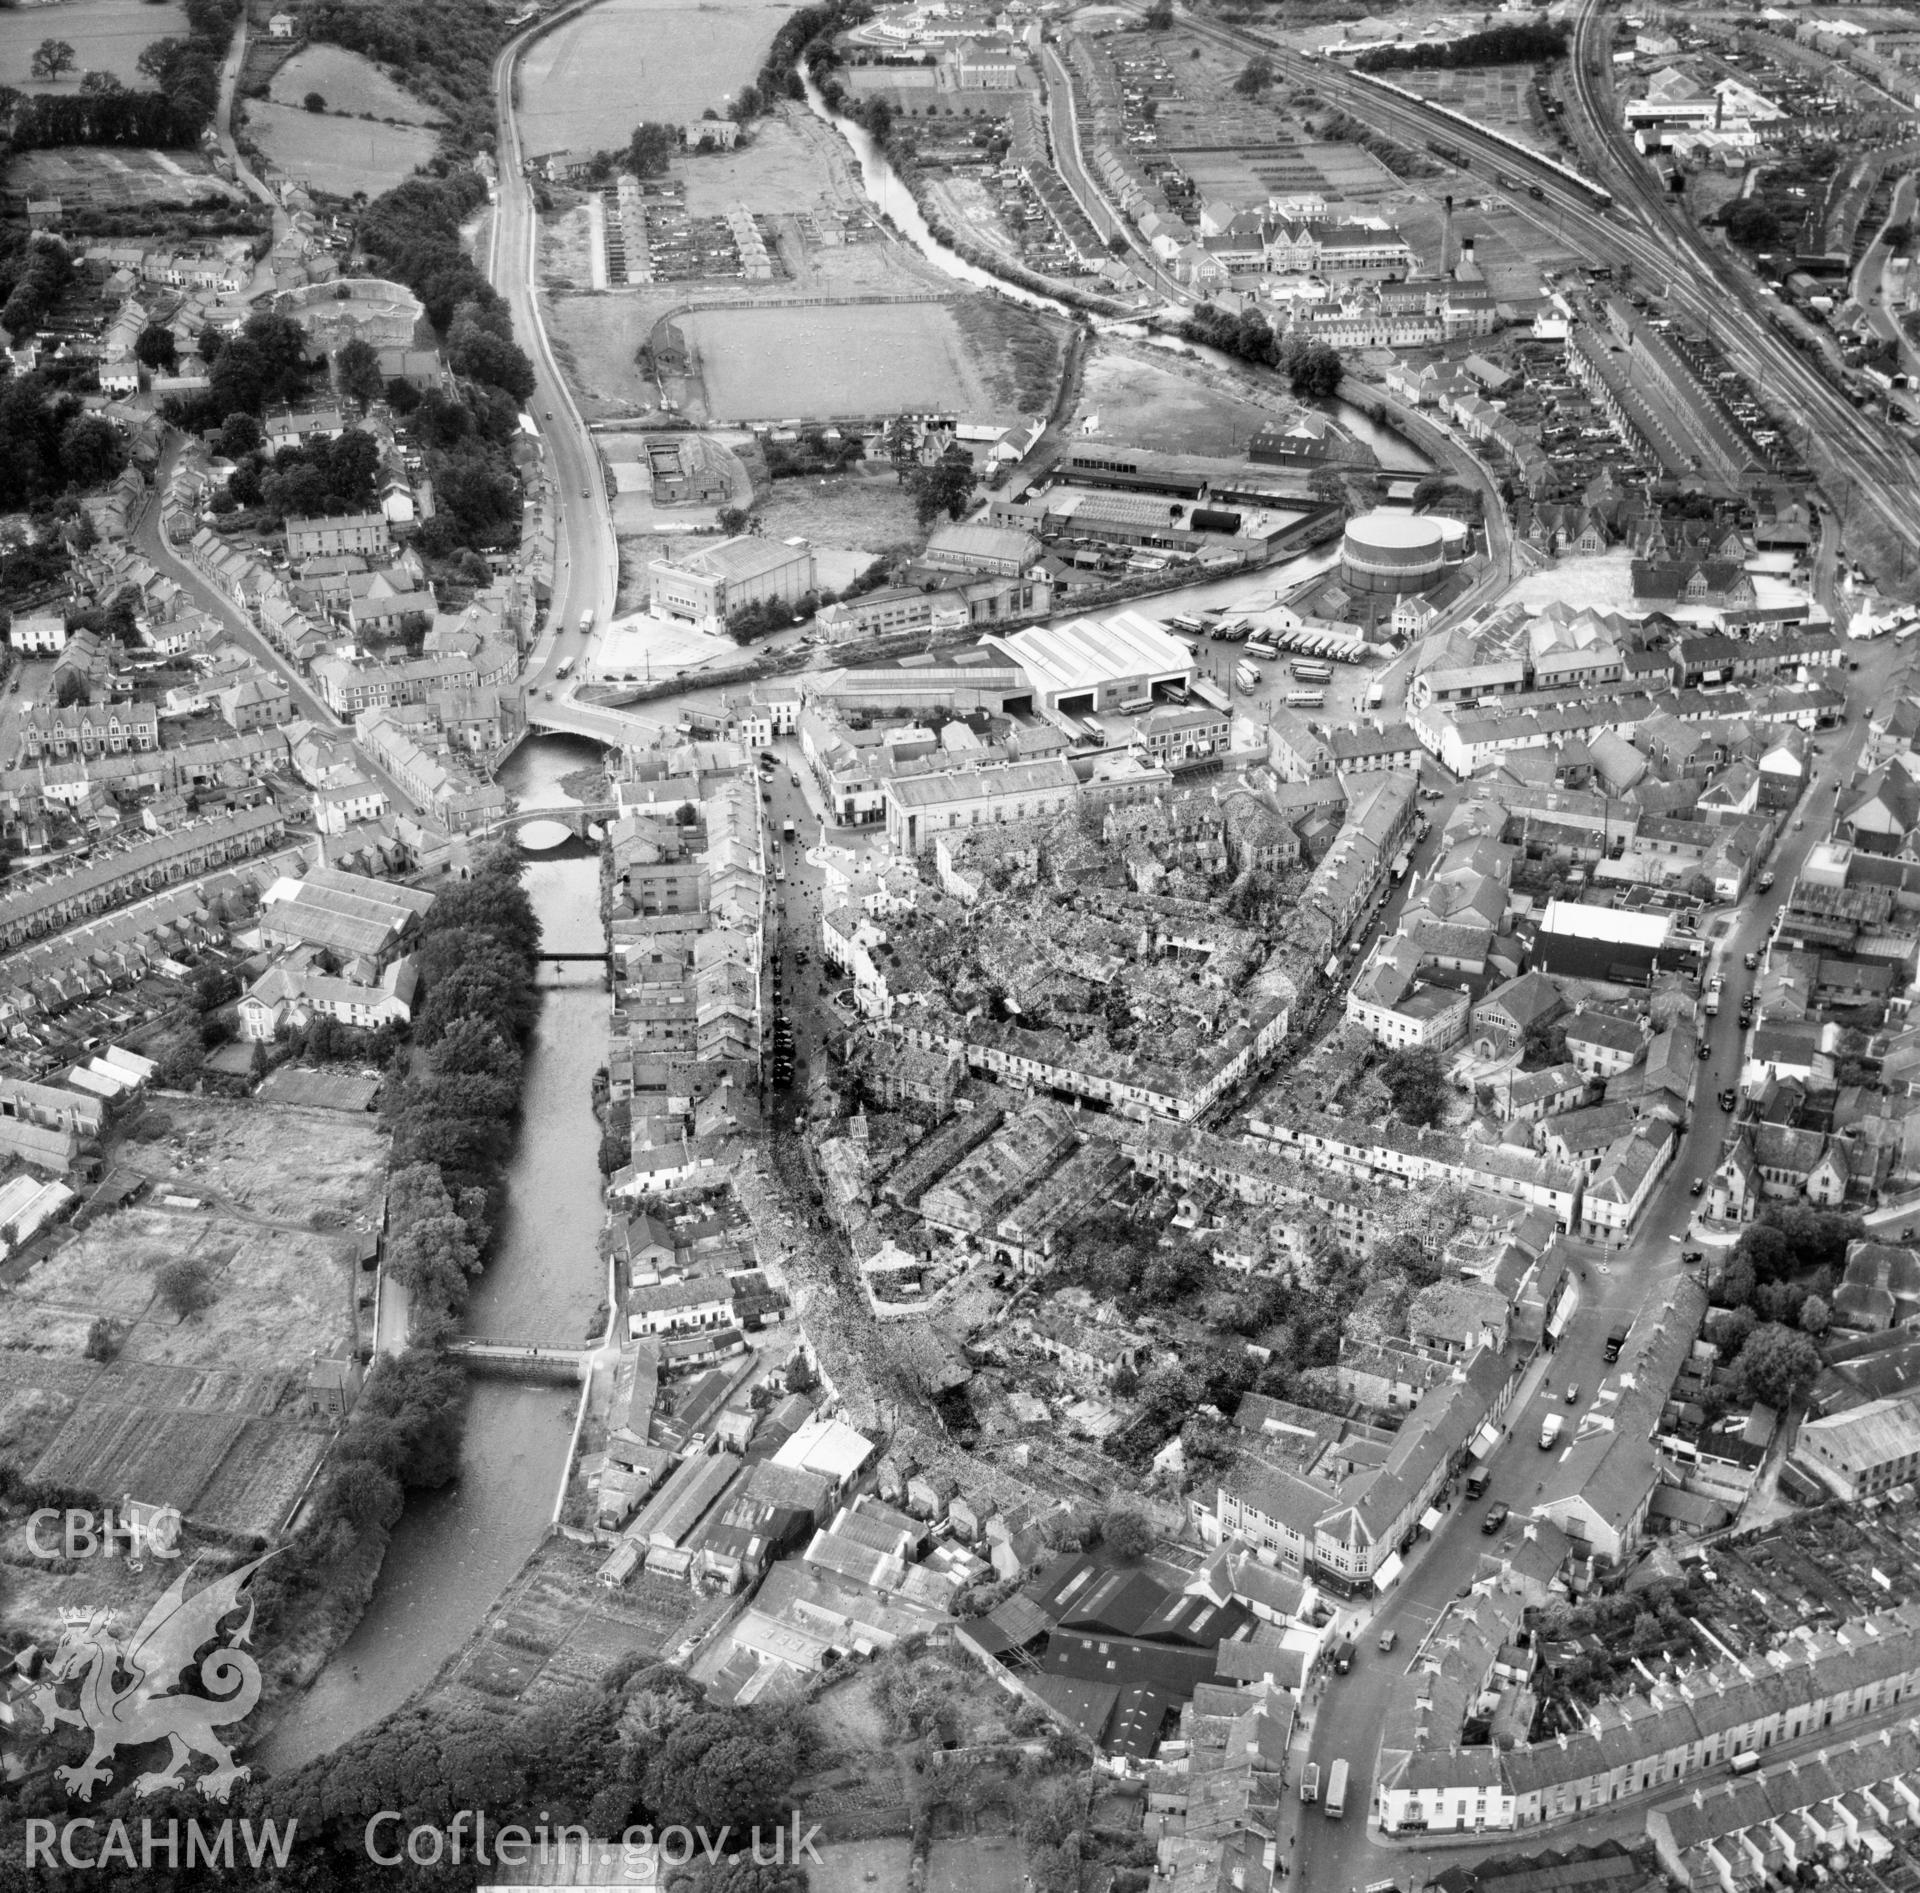 General view of Bridgend showing centre of the town. Oblique aerial photograph, 5?" cut roll film.